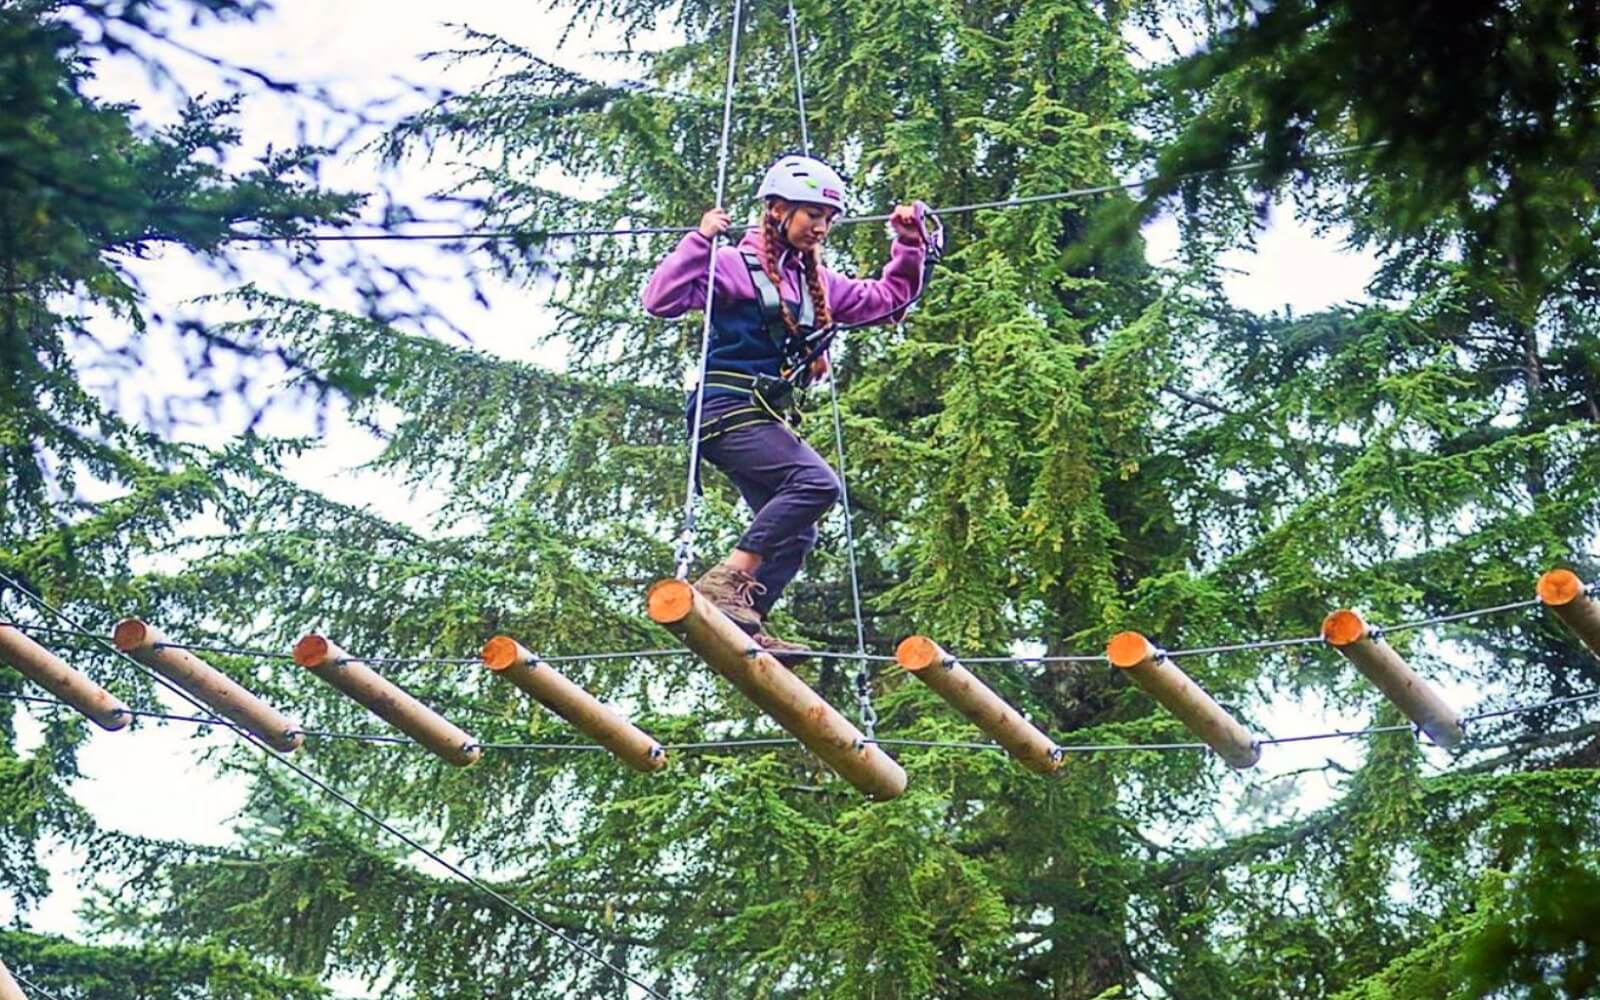 A woman climbs through the forest on a ropes adventure